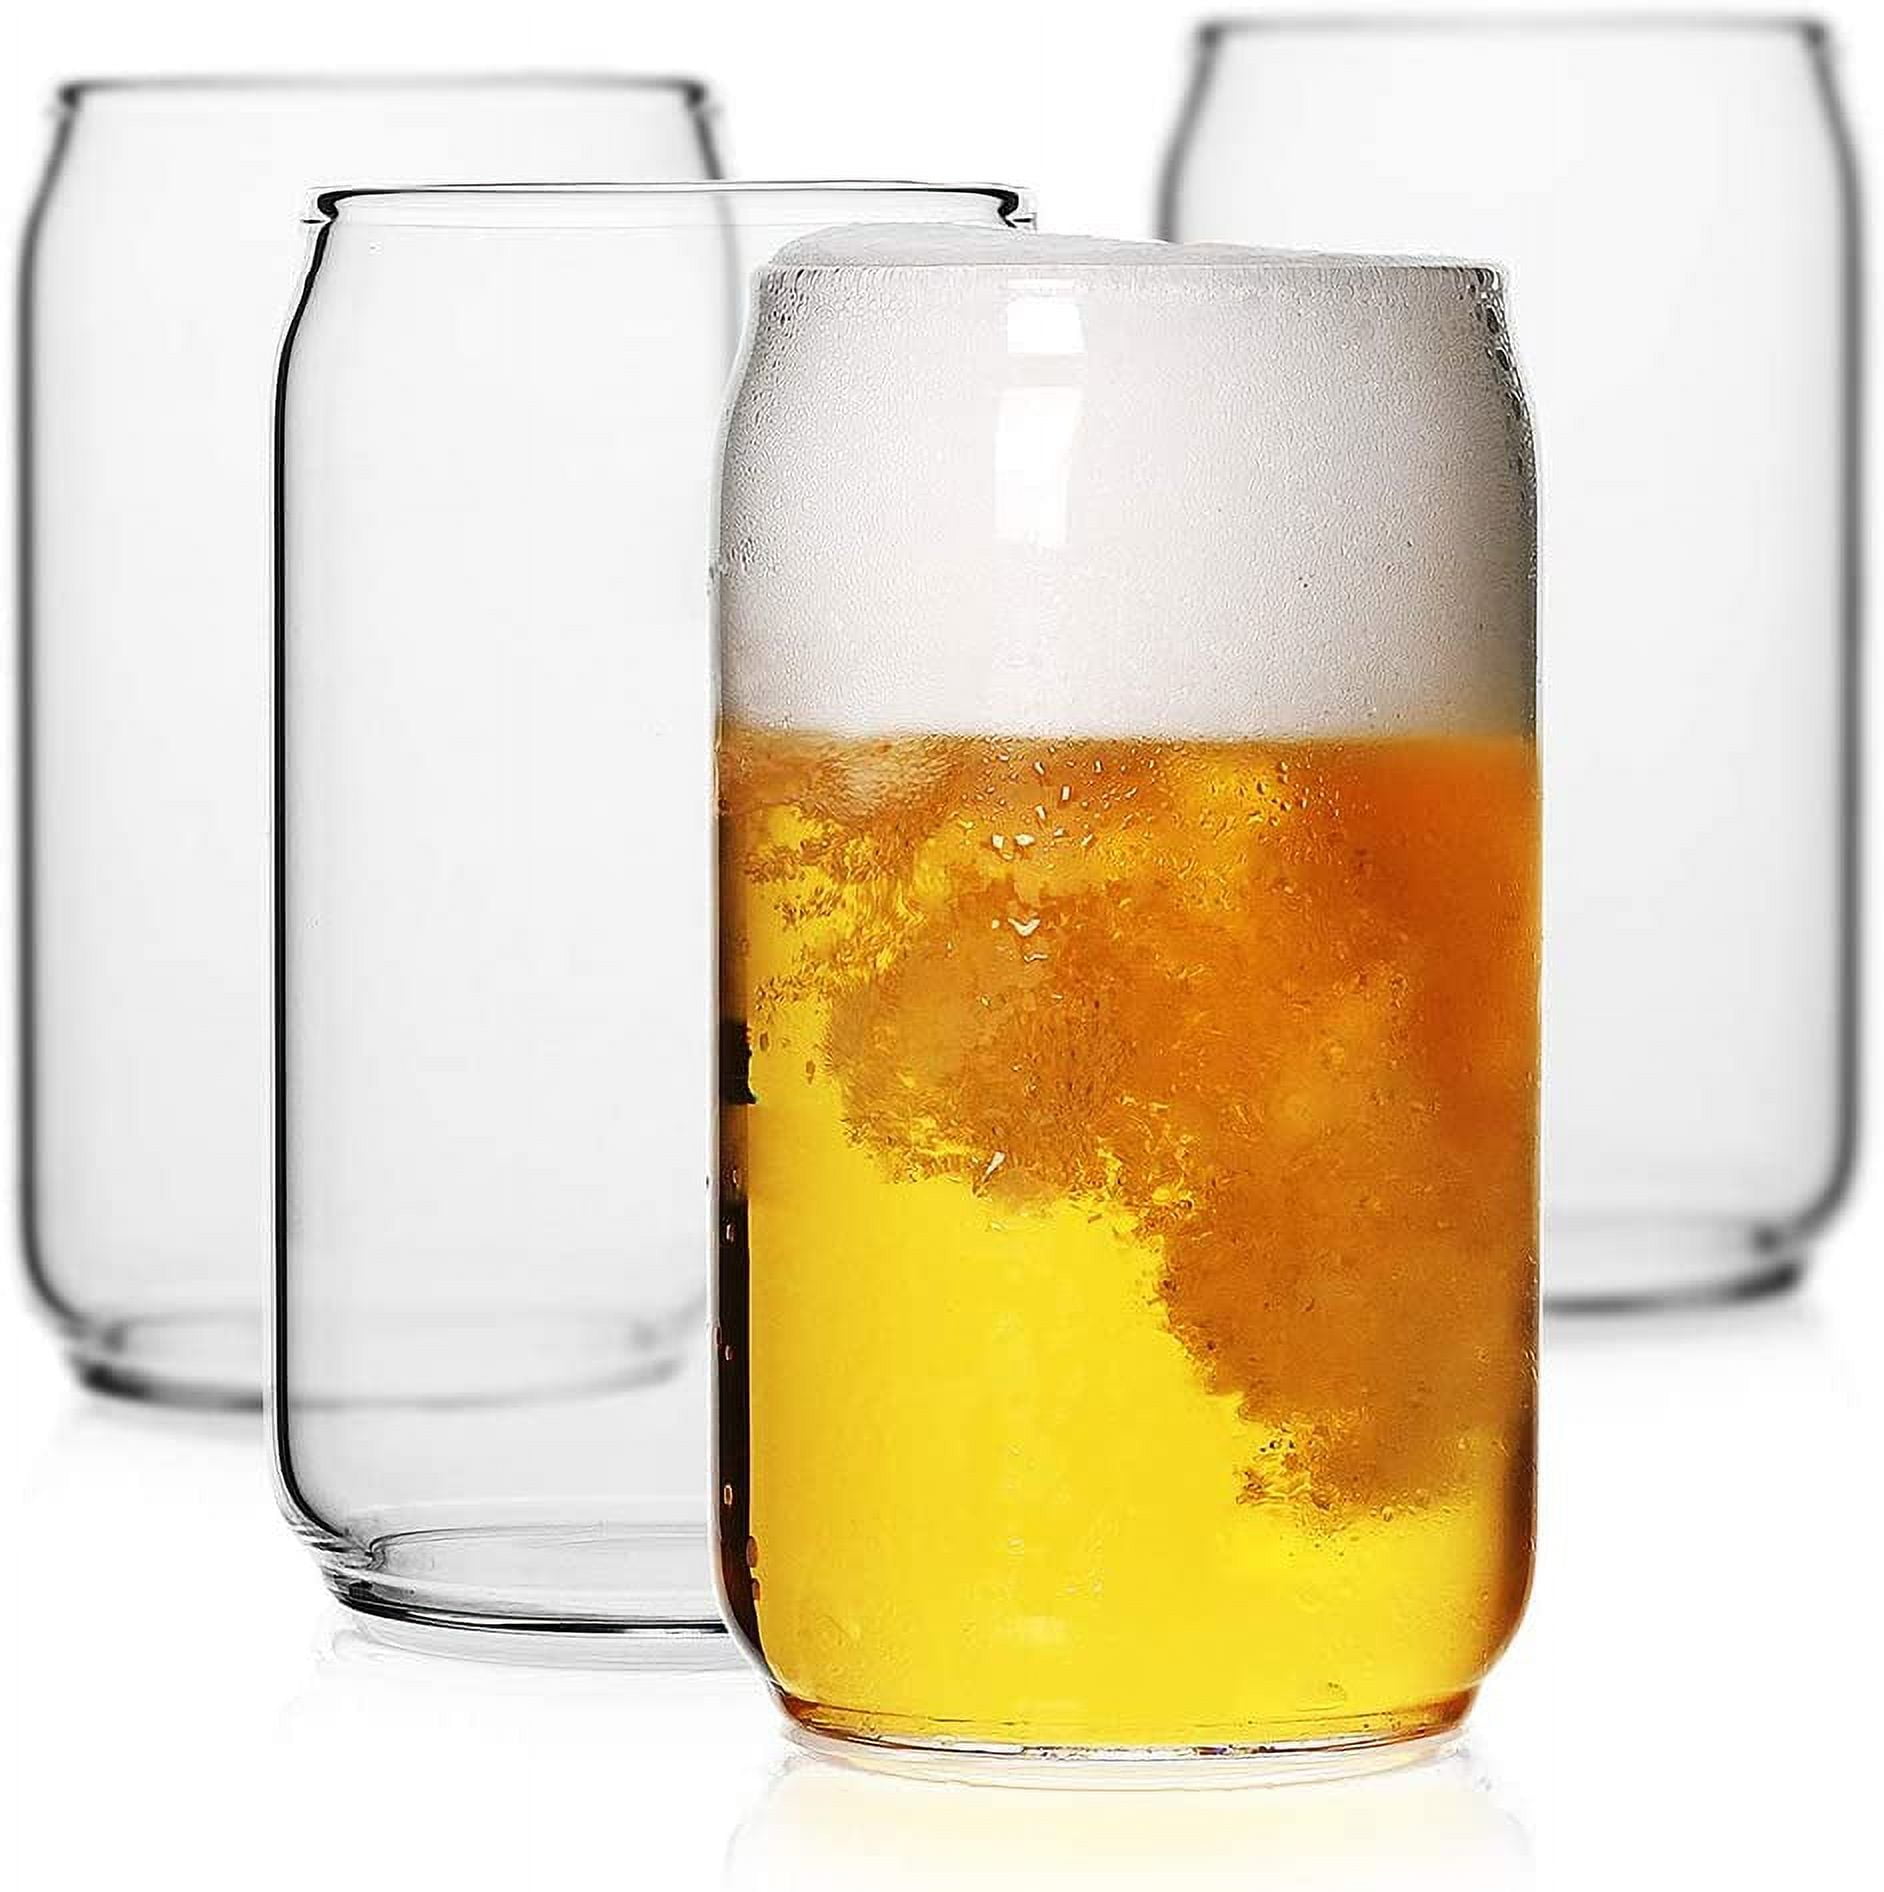 LUXU Beer Glass, 20 oz Can Shaped Beer Glasses Set of 4 -Craft